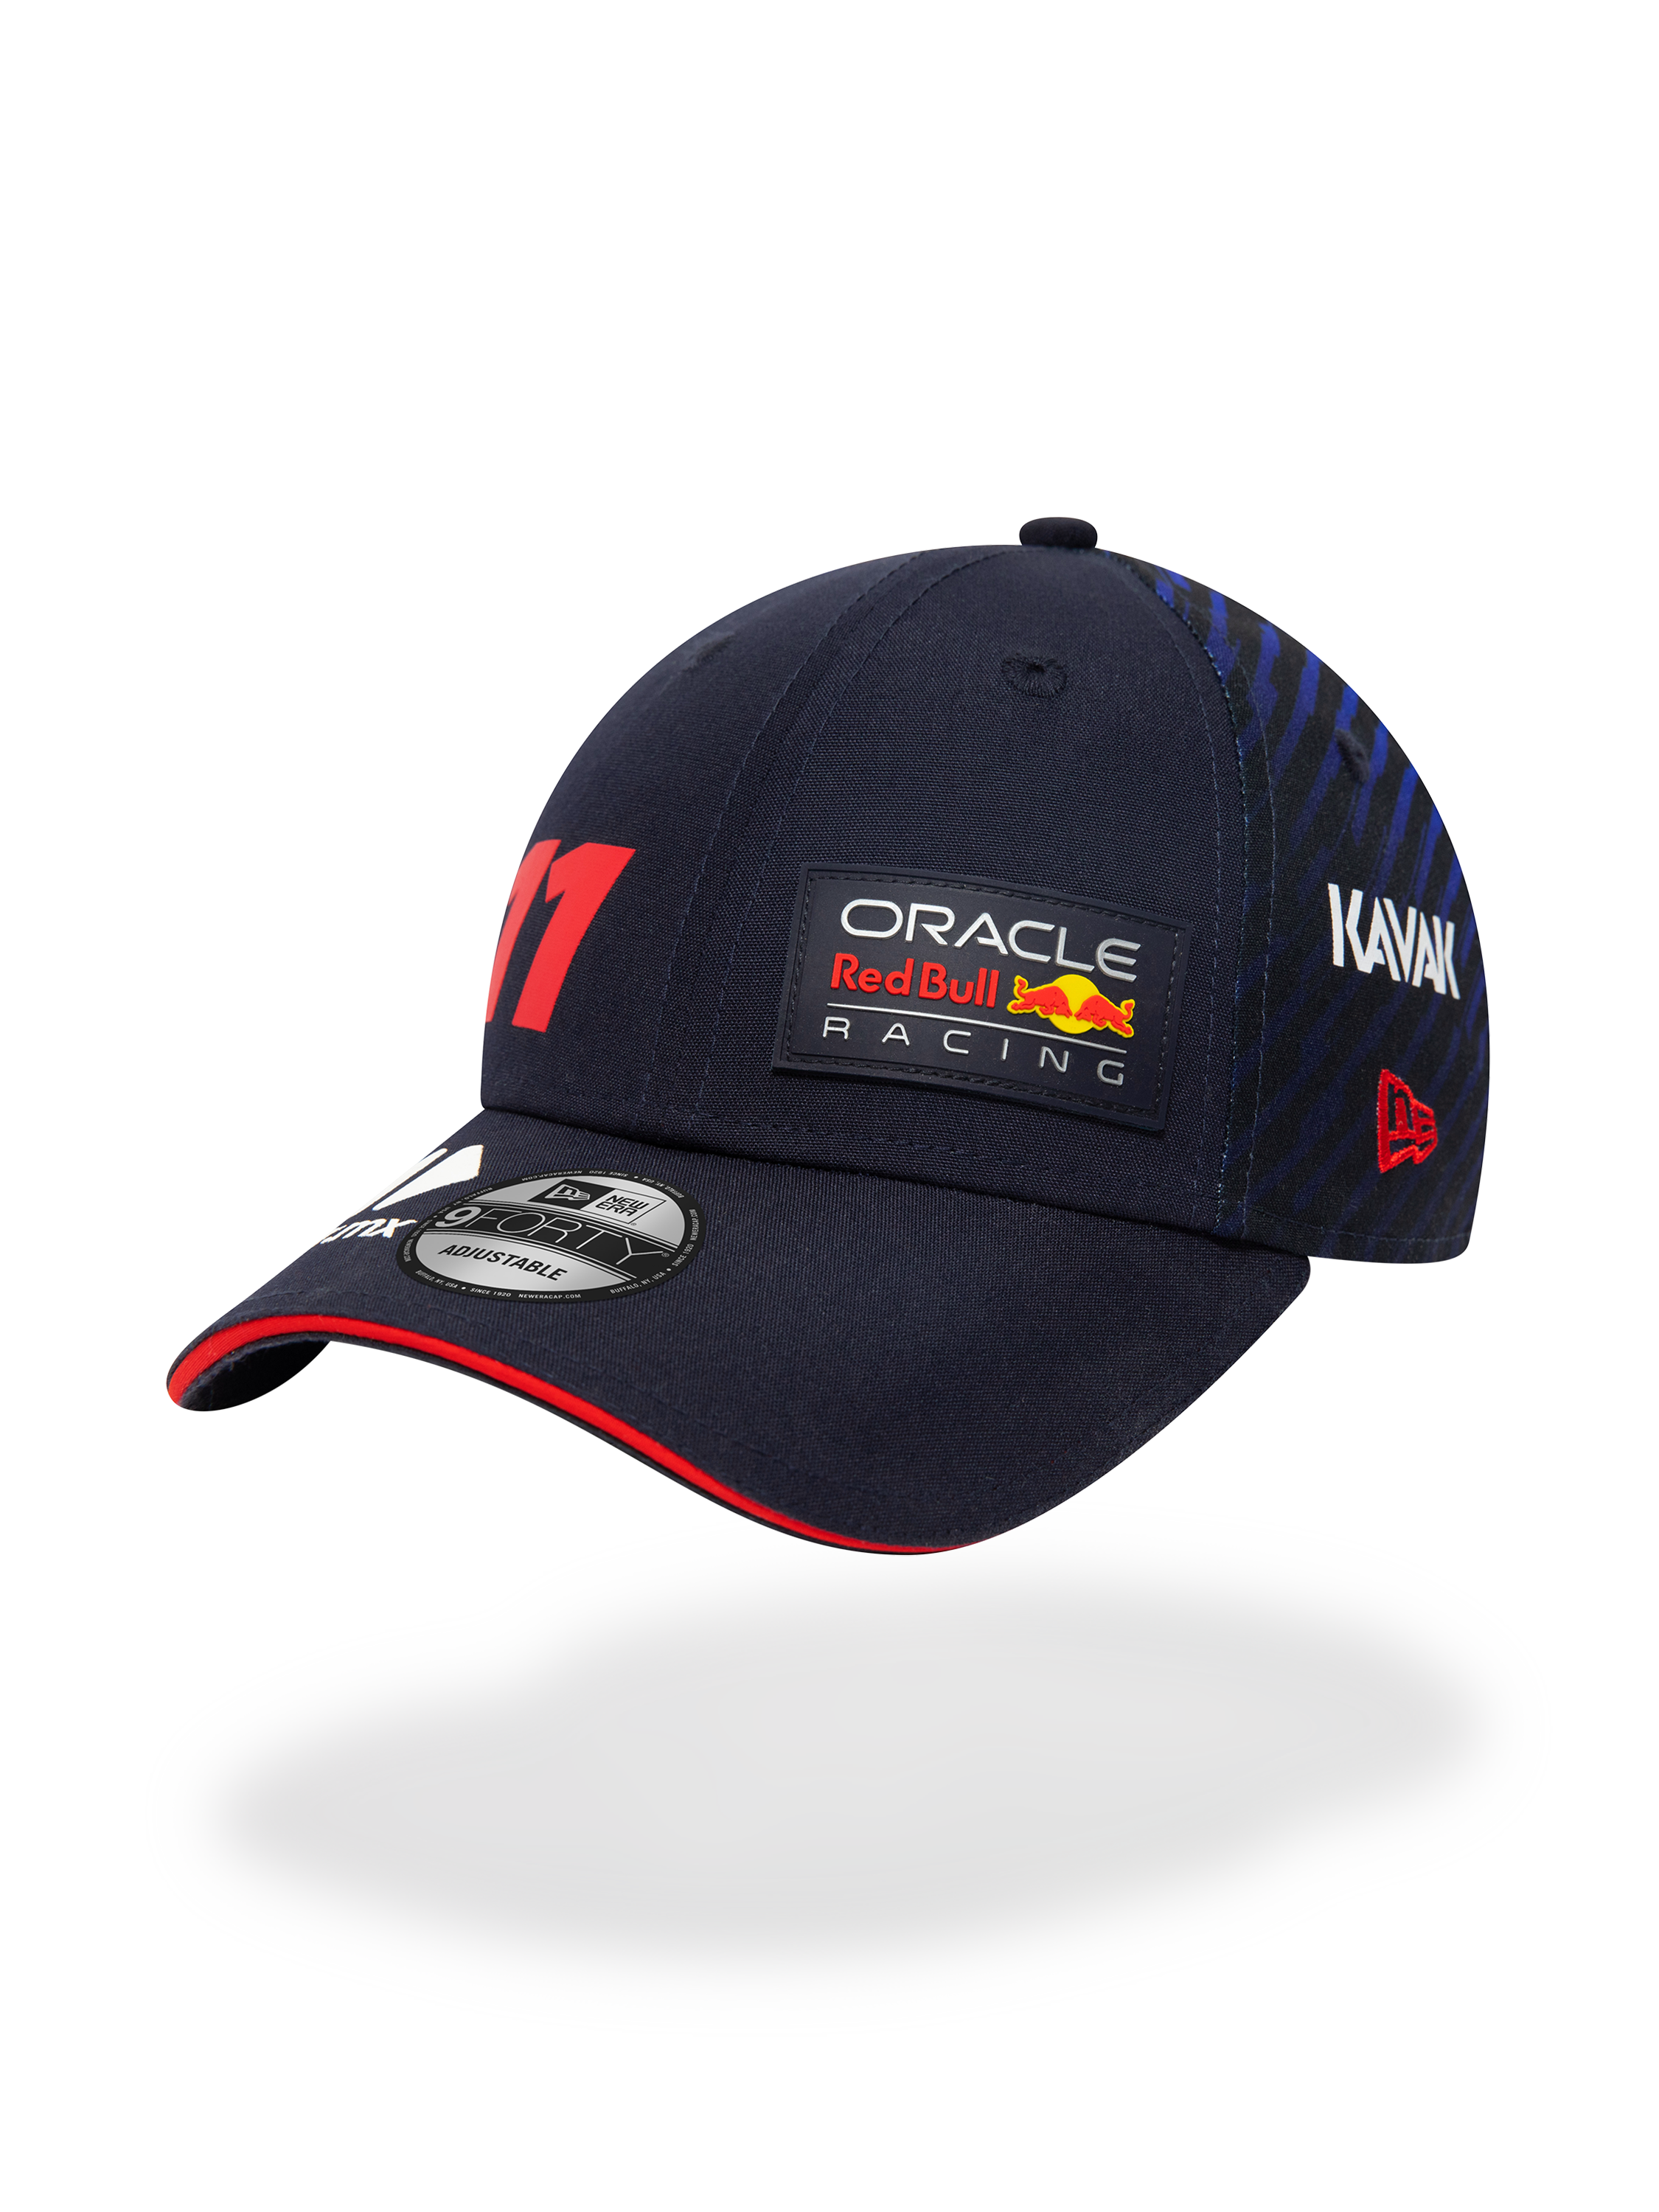 Oracle Red Bull Racing New Era 9Fifty Perez Driver Hat